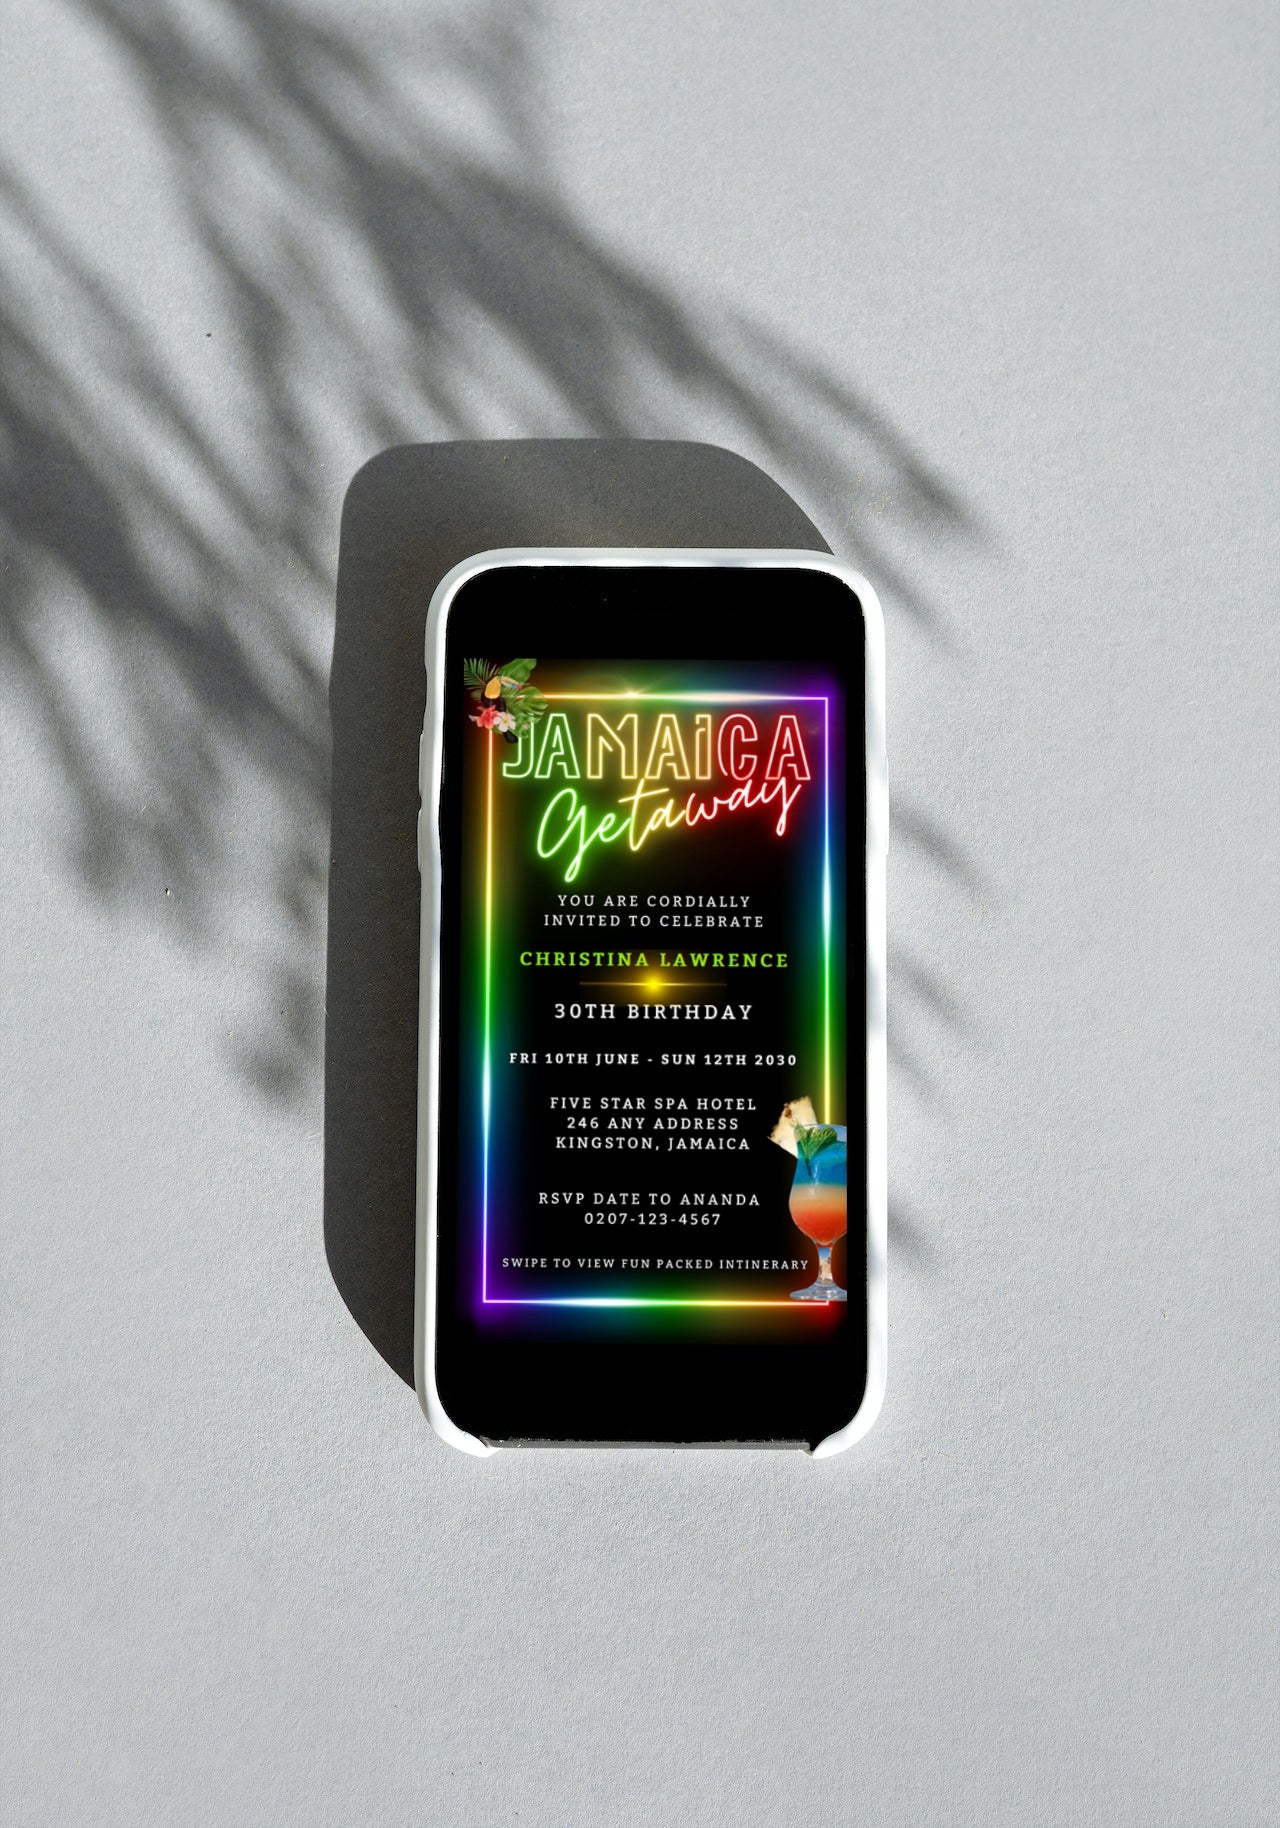 Jamaica Colourful Neon Getaway Party Evite displayed on a smartphone with a vibrant, customizable template for digital invitations.